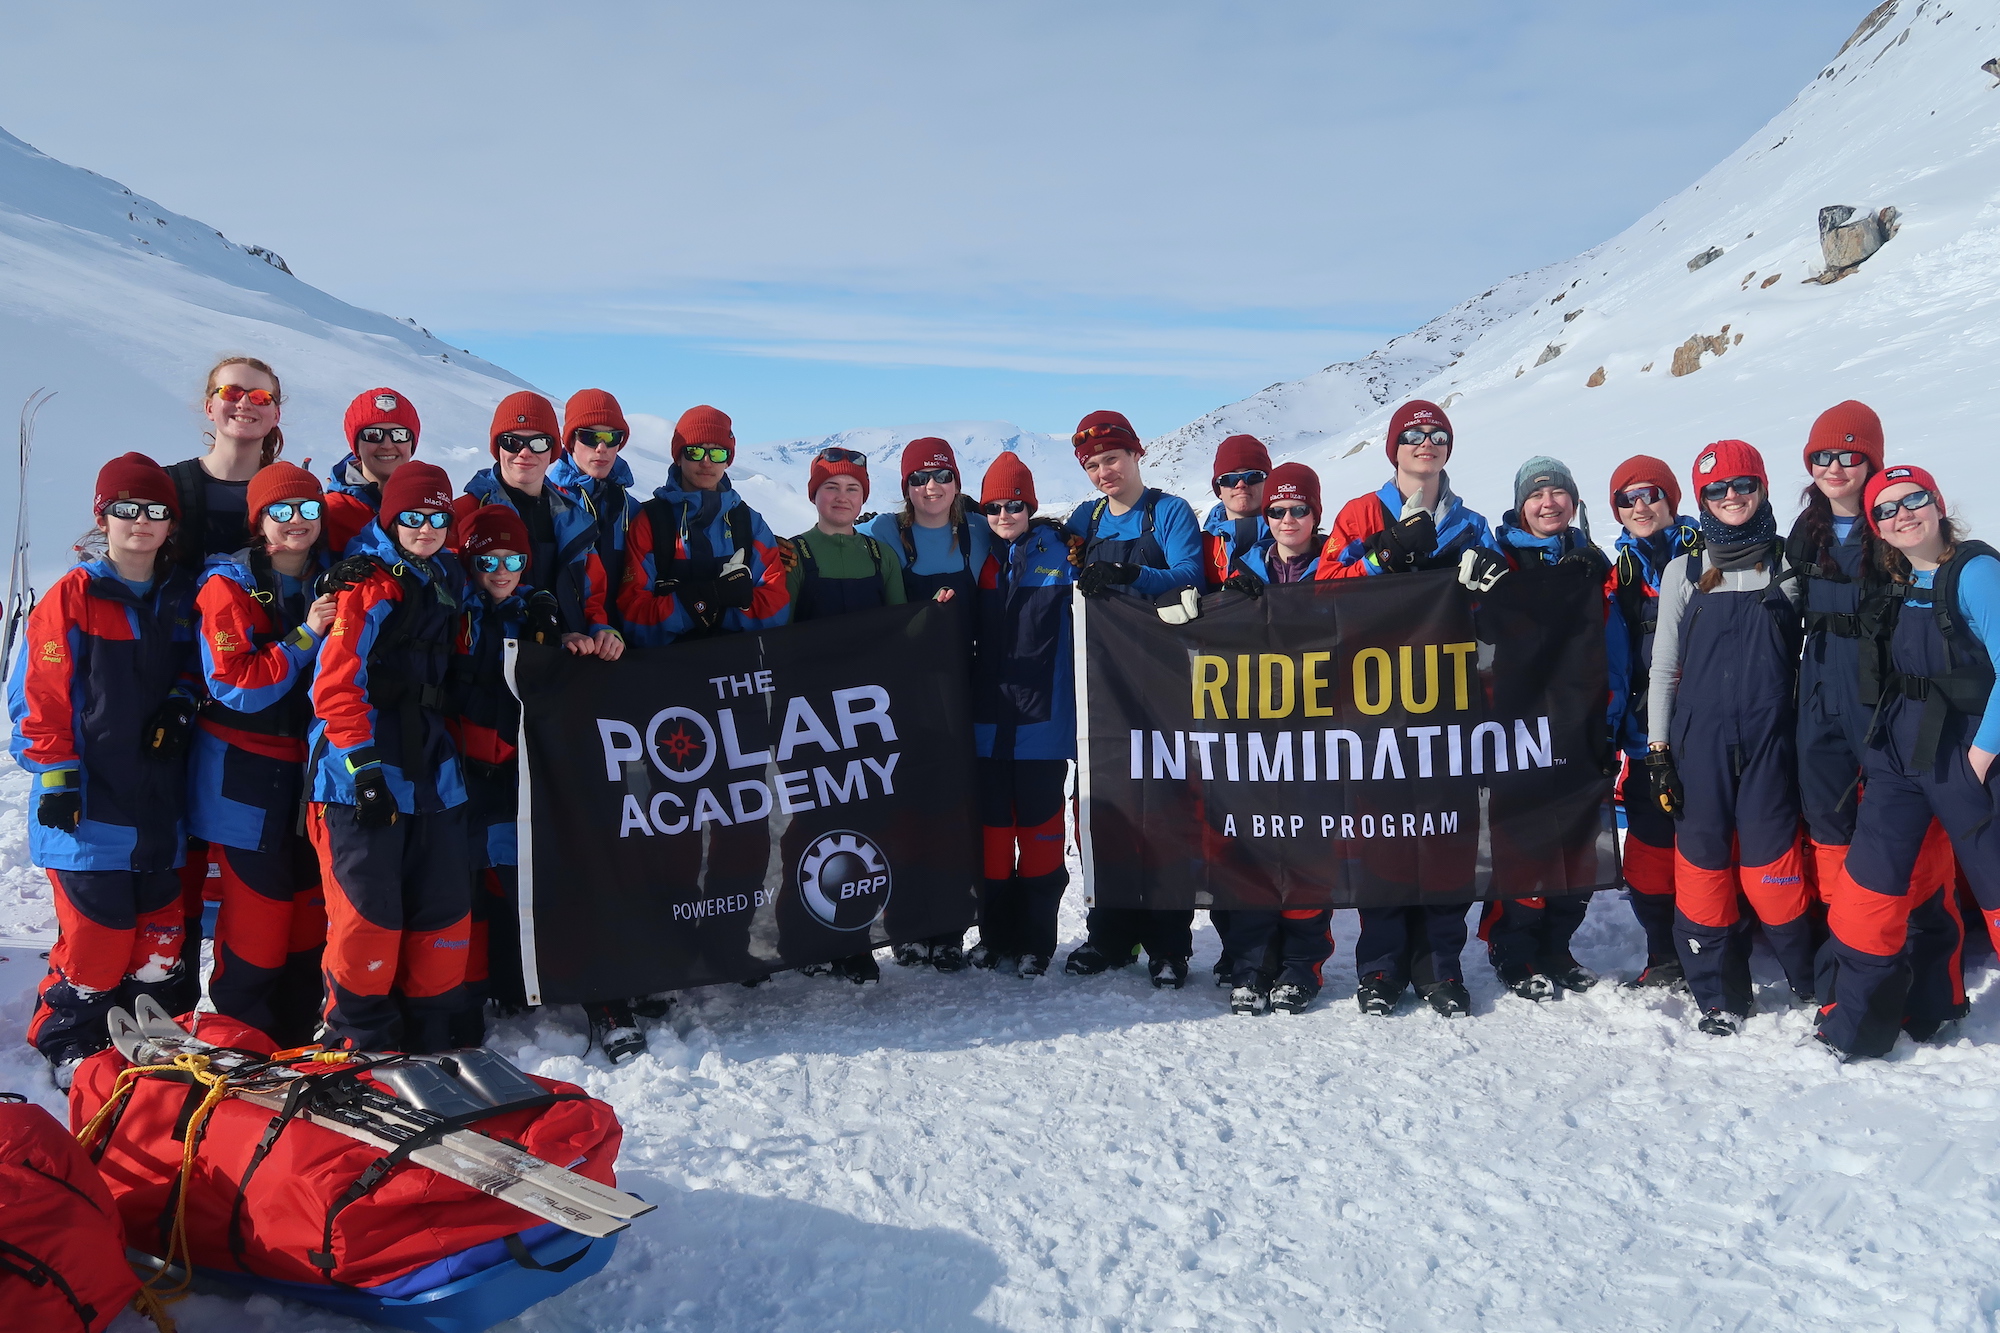 The young people of the 2023 Expedition on the ice in Greenland all together holding up flags with the BRP logo and smiling